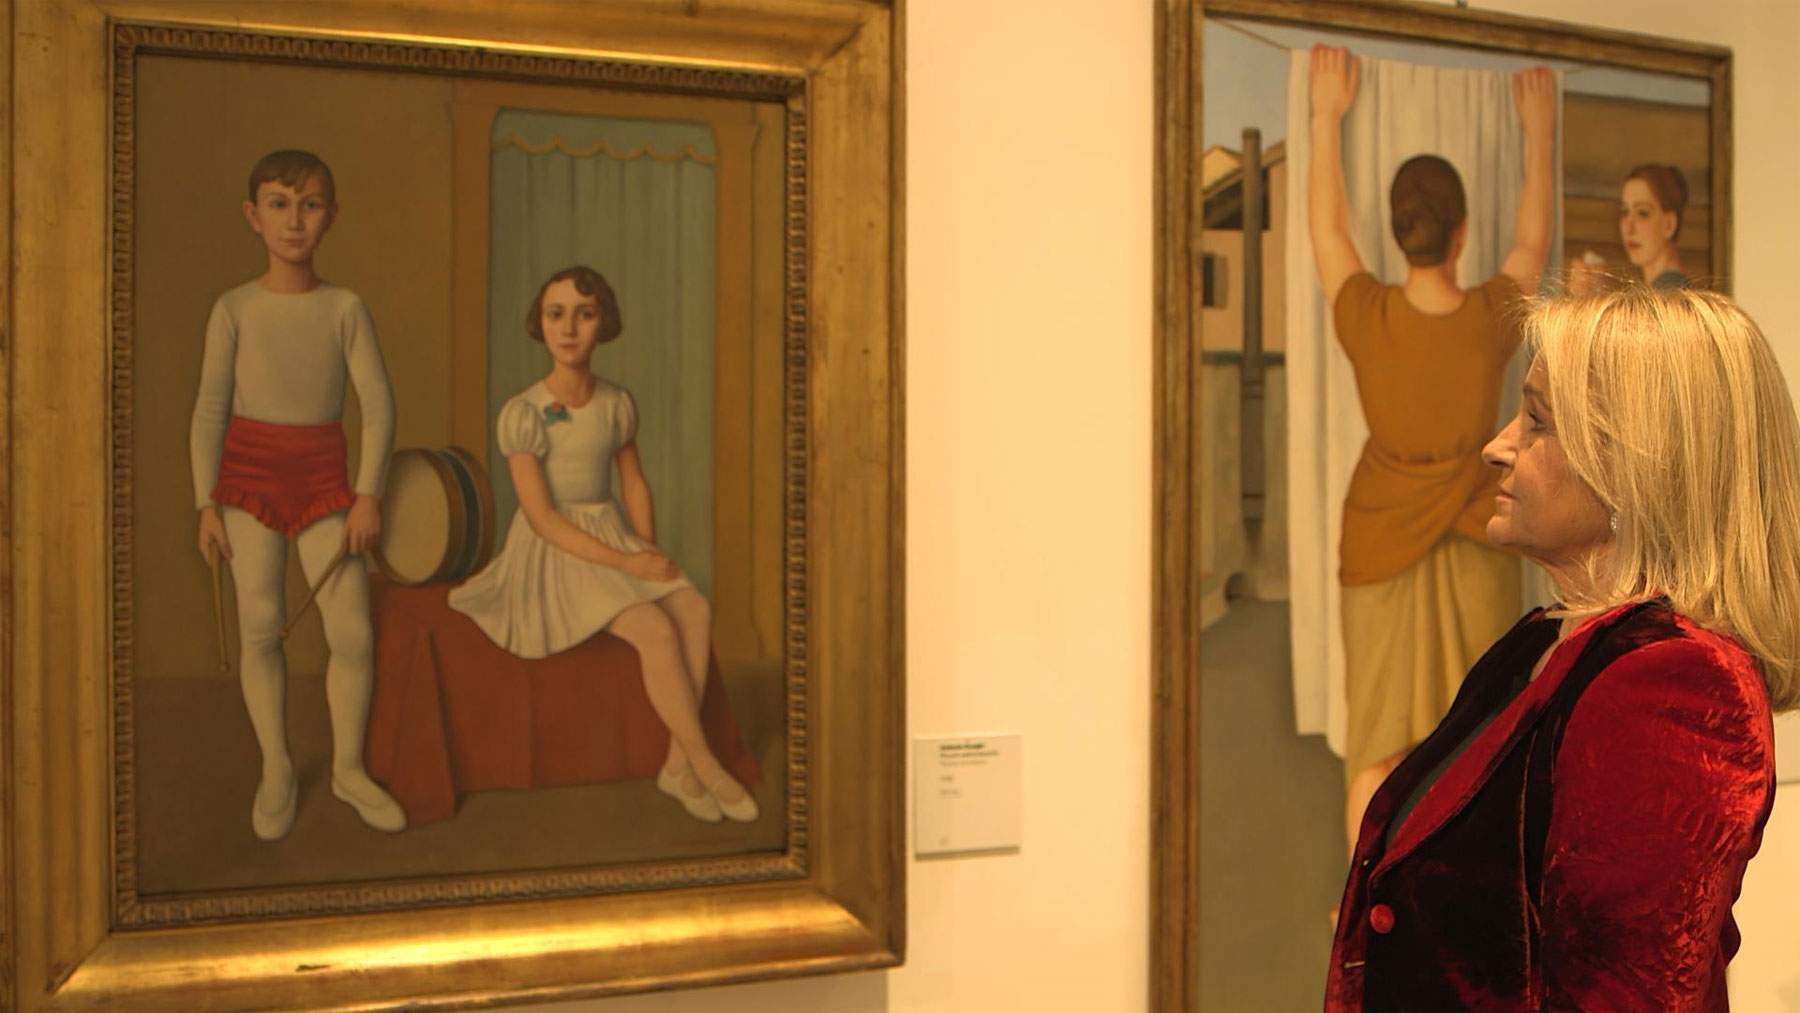 Rai5, an episode of Art Night dedicated to Italy's great private collections 